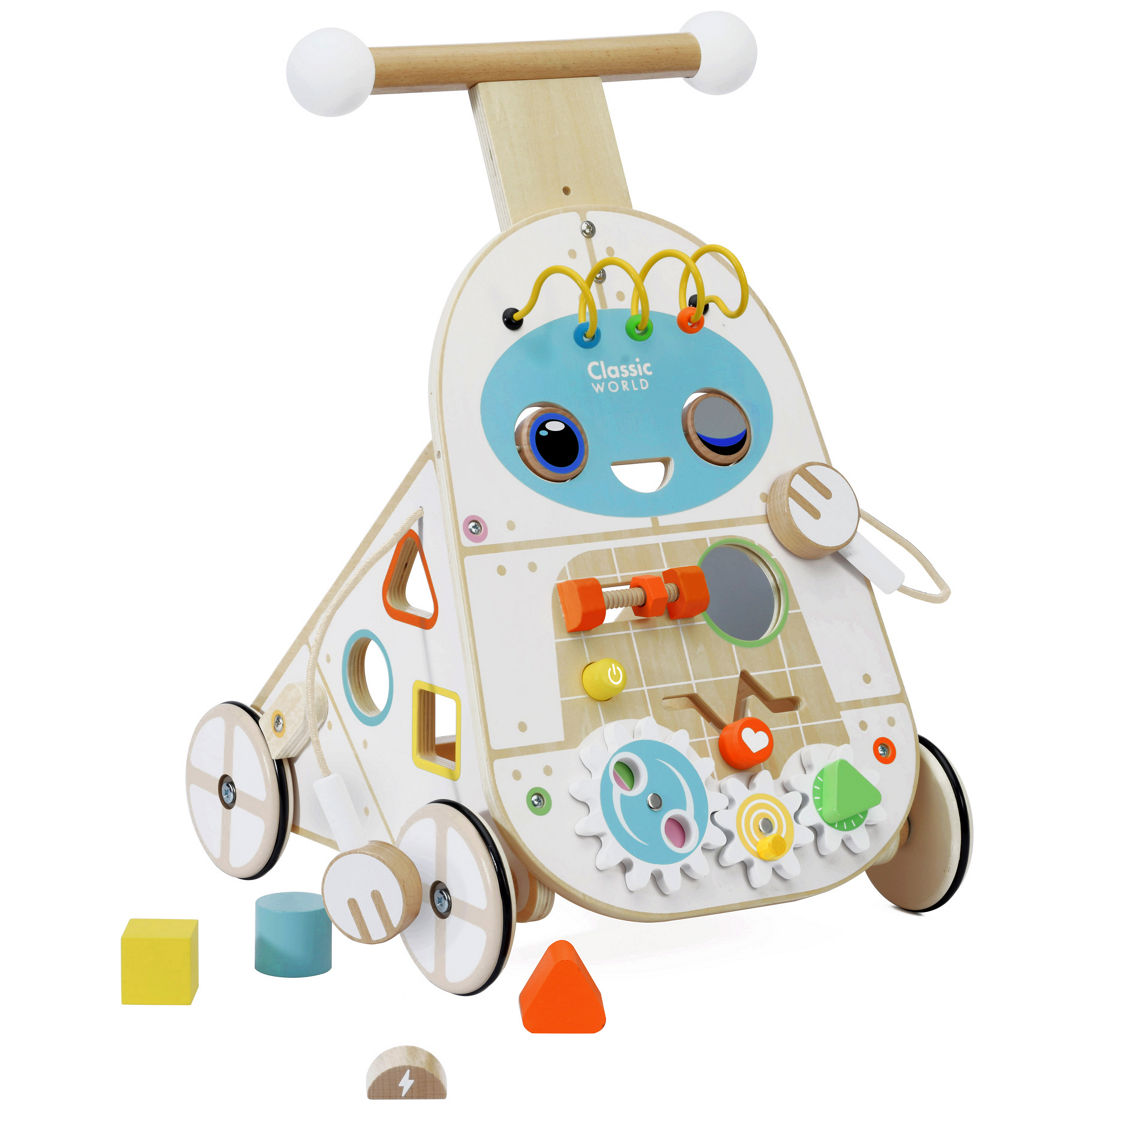 Classic Toy Learning Robot Walker Toy - Image 2 of 4